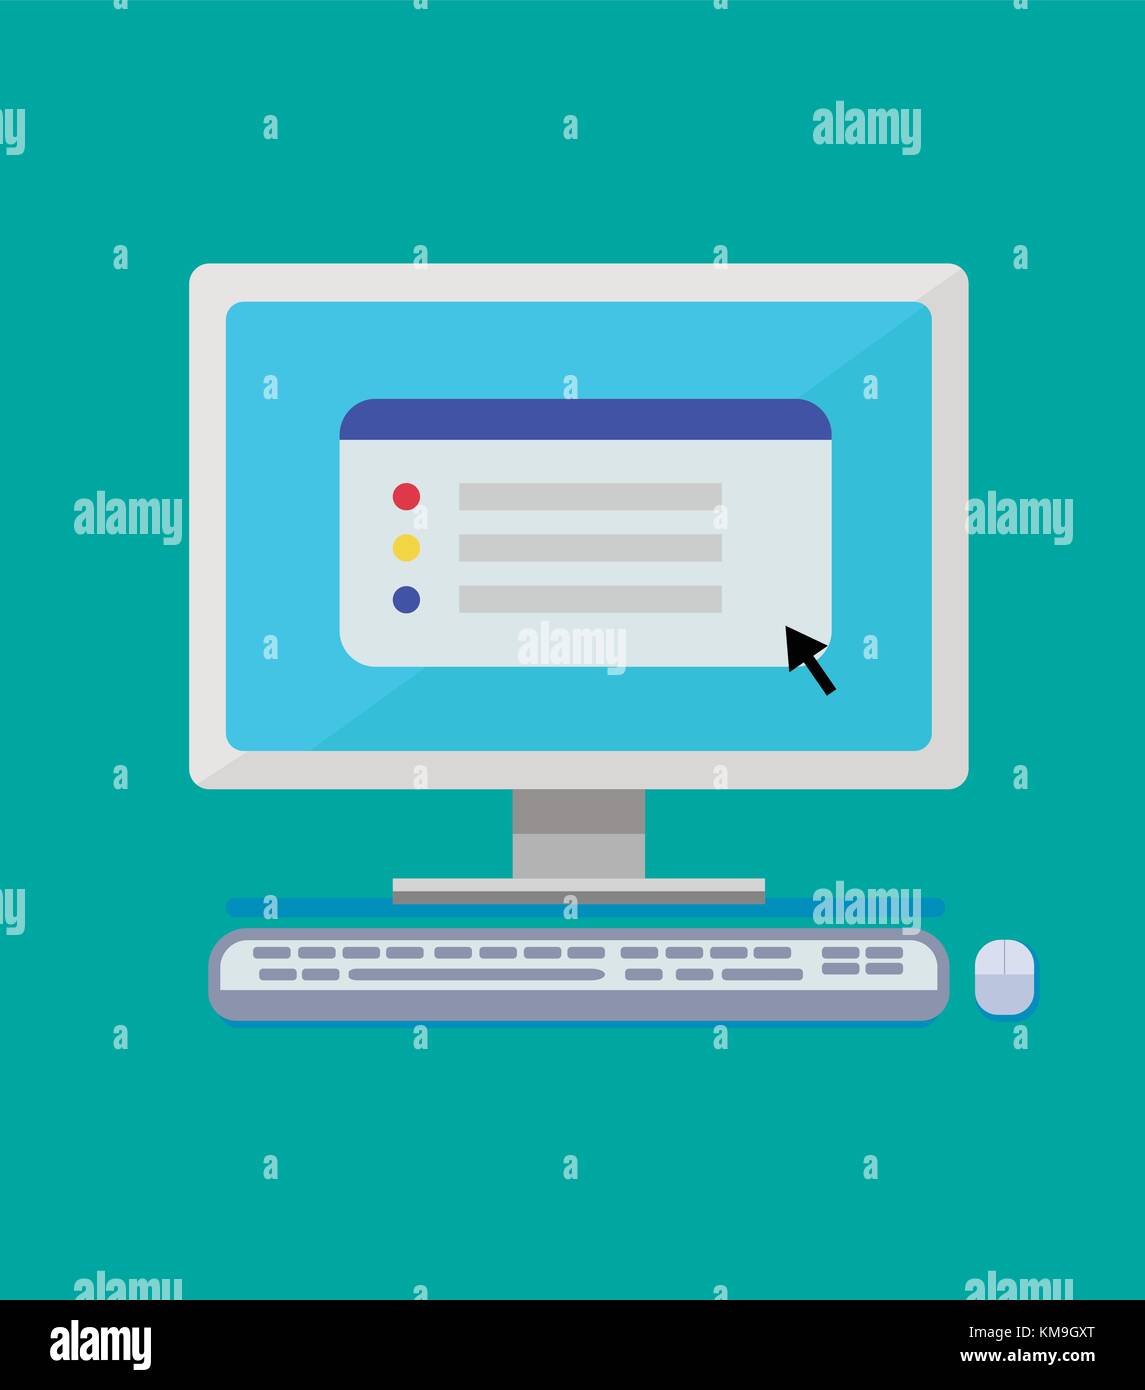 Flat computer design with keyboard, mouse and simple website show on screen vector illustration. Stock Vector